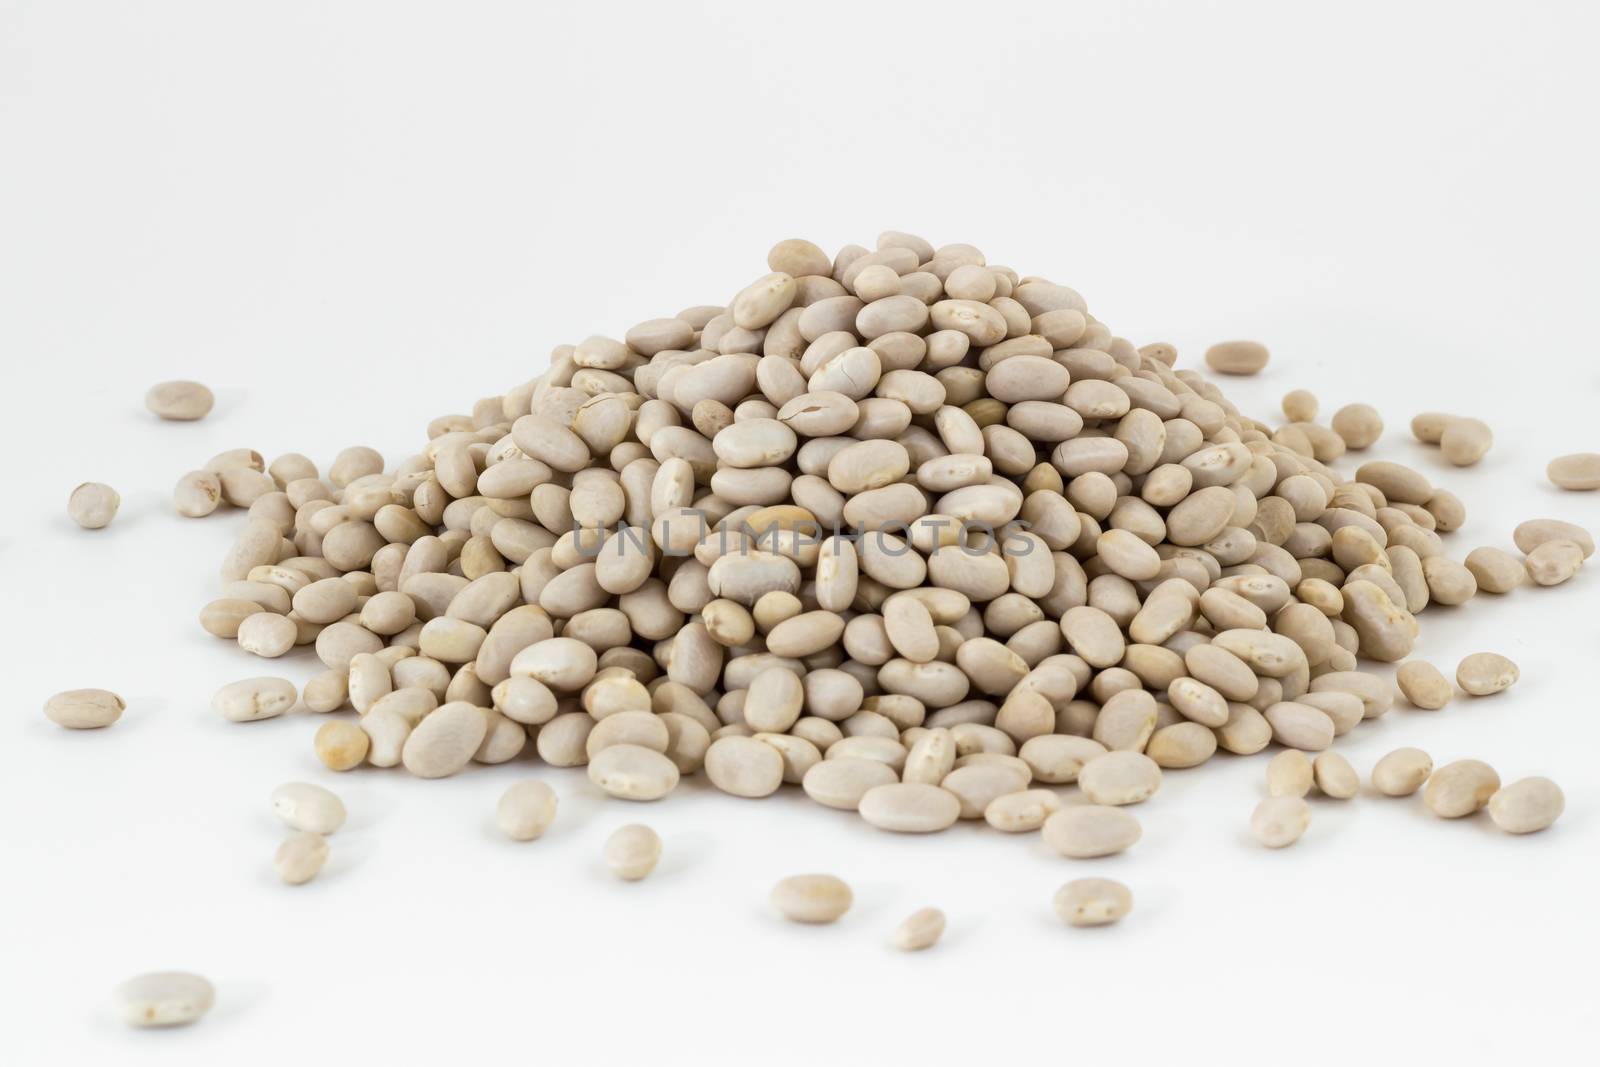 Heap of navy beans on white background. Shallow DOF.